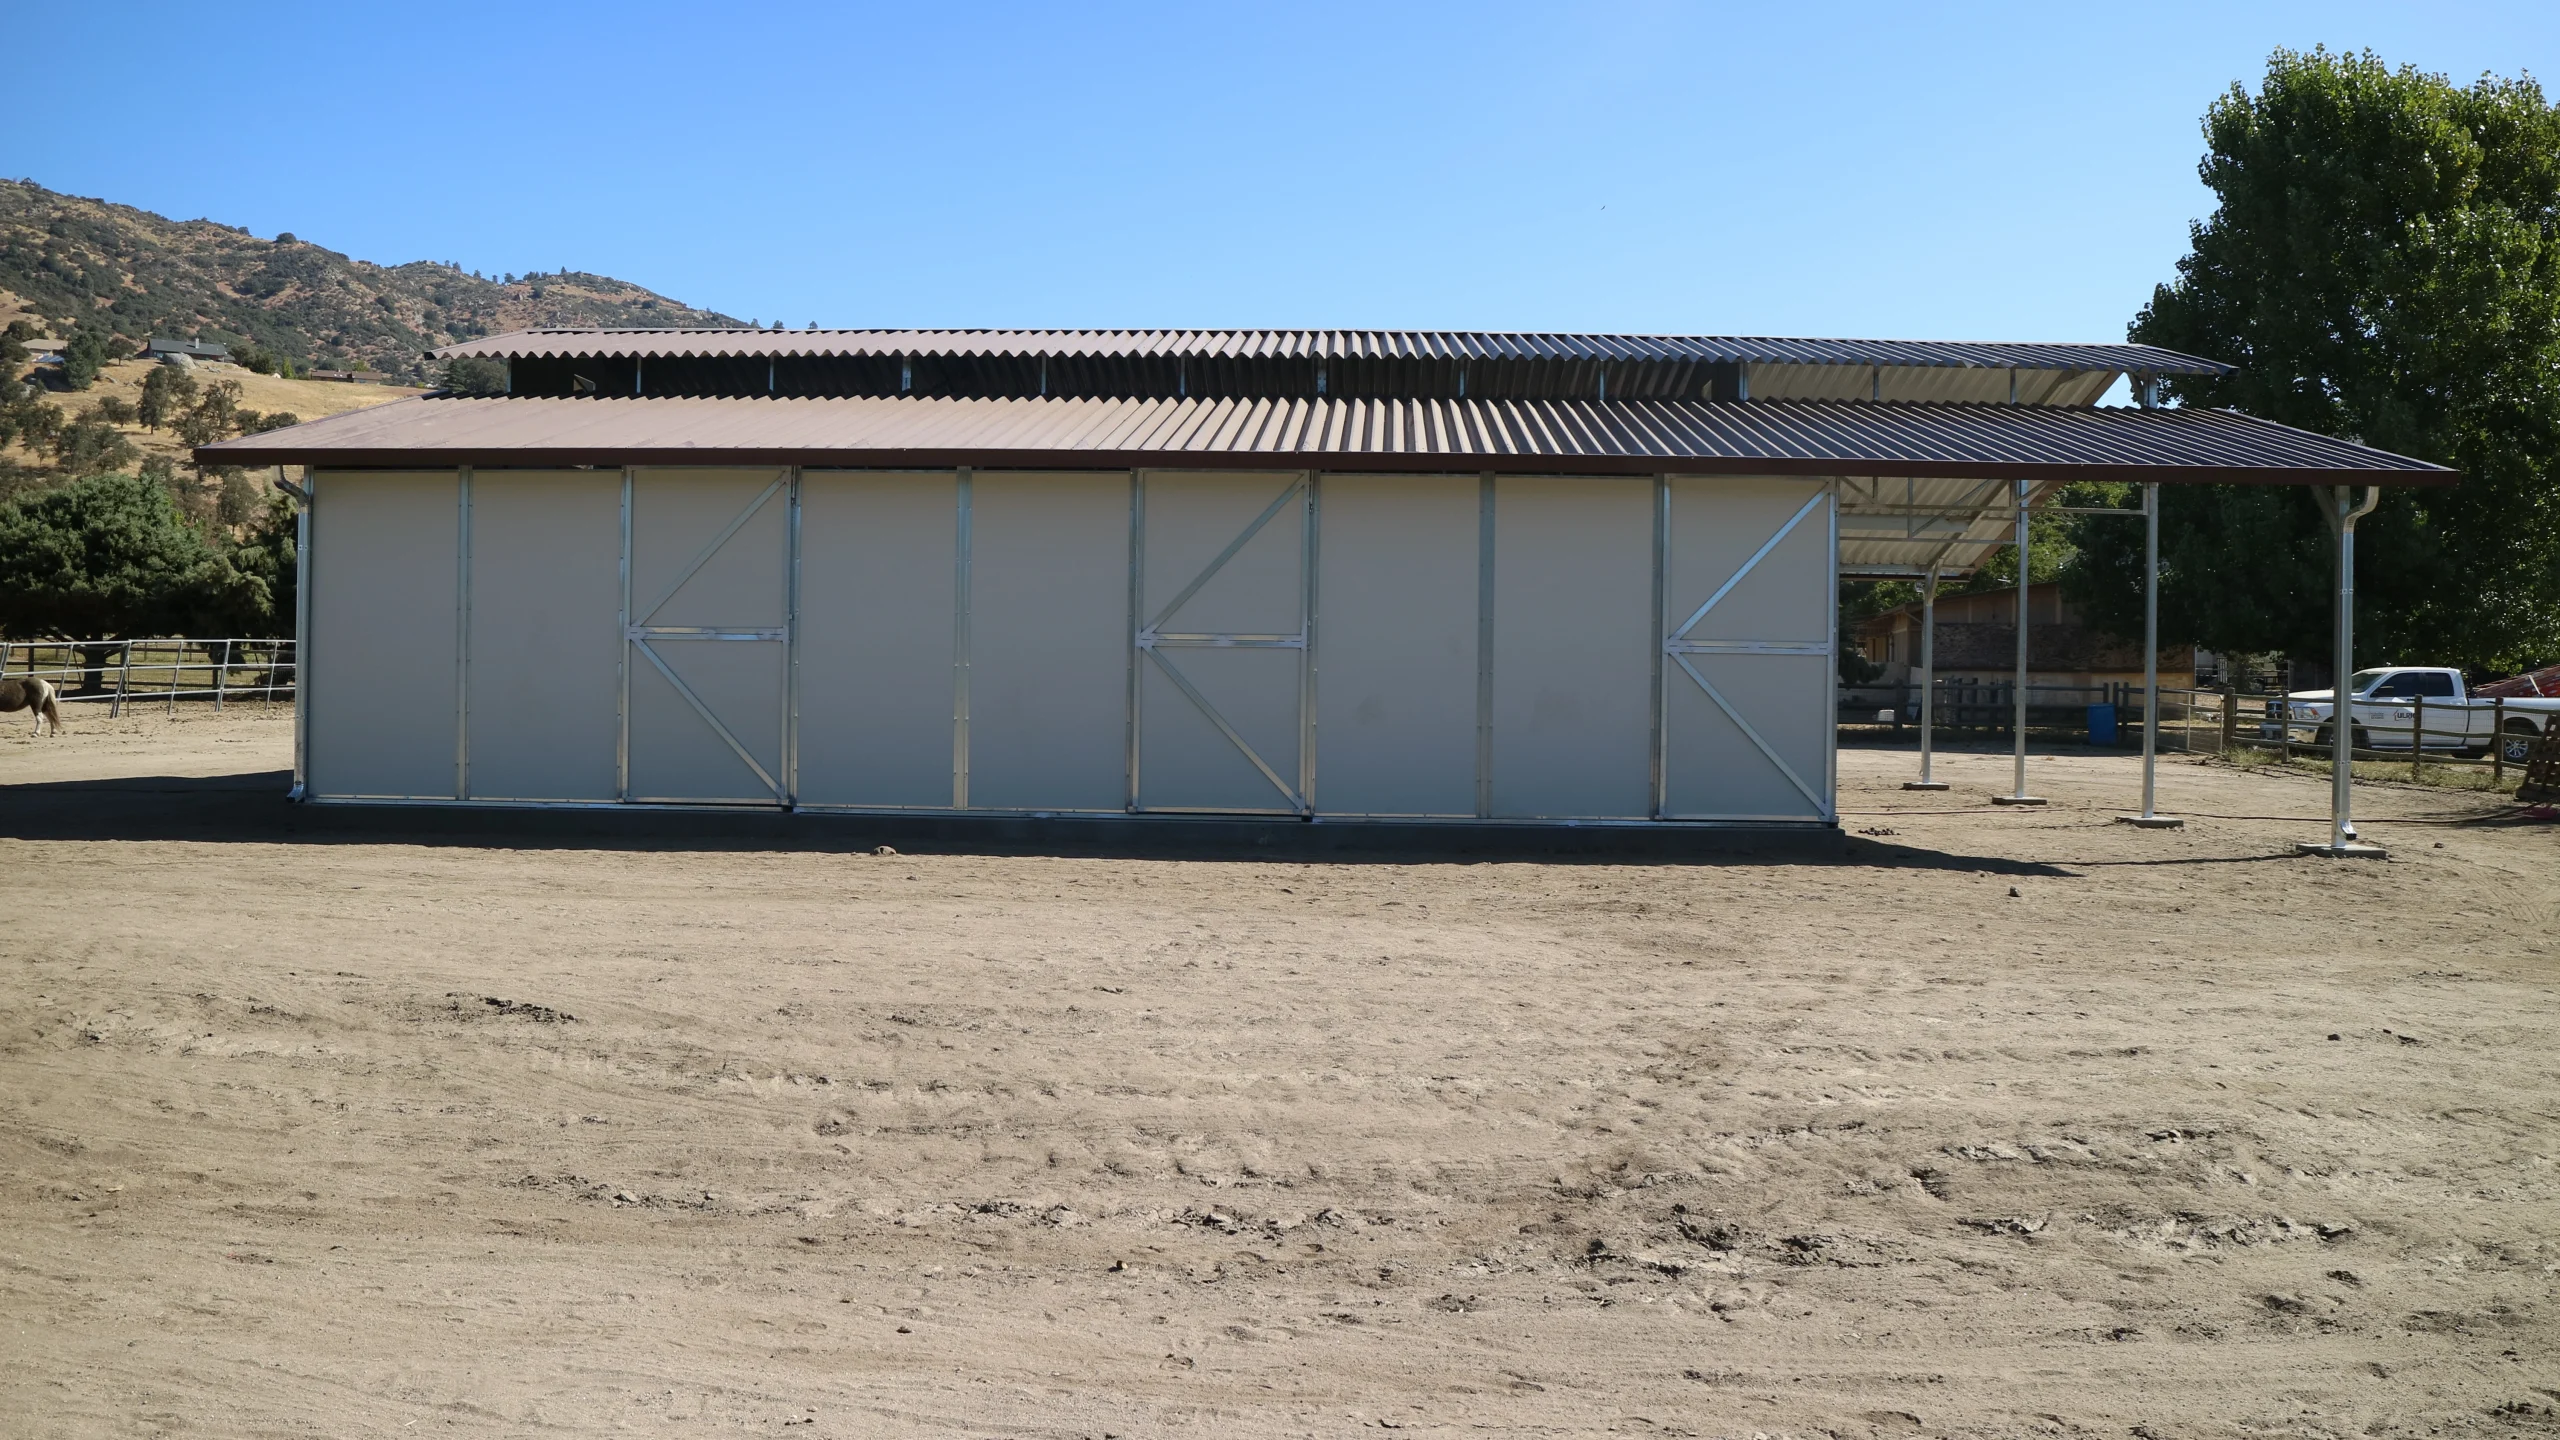 Run-in Shed Stalls or Horse Stalls: Choosing the Best for Your Majestic Friends